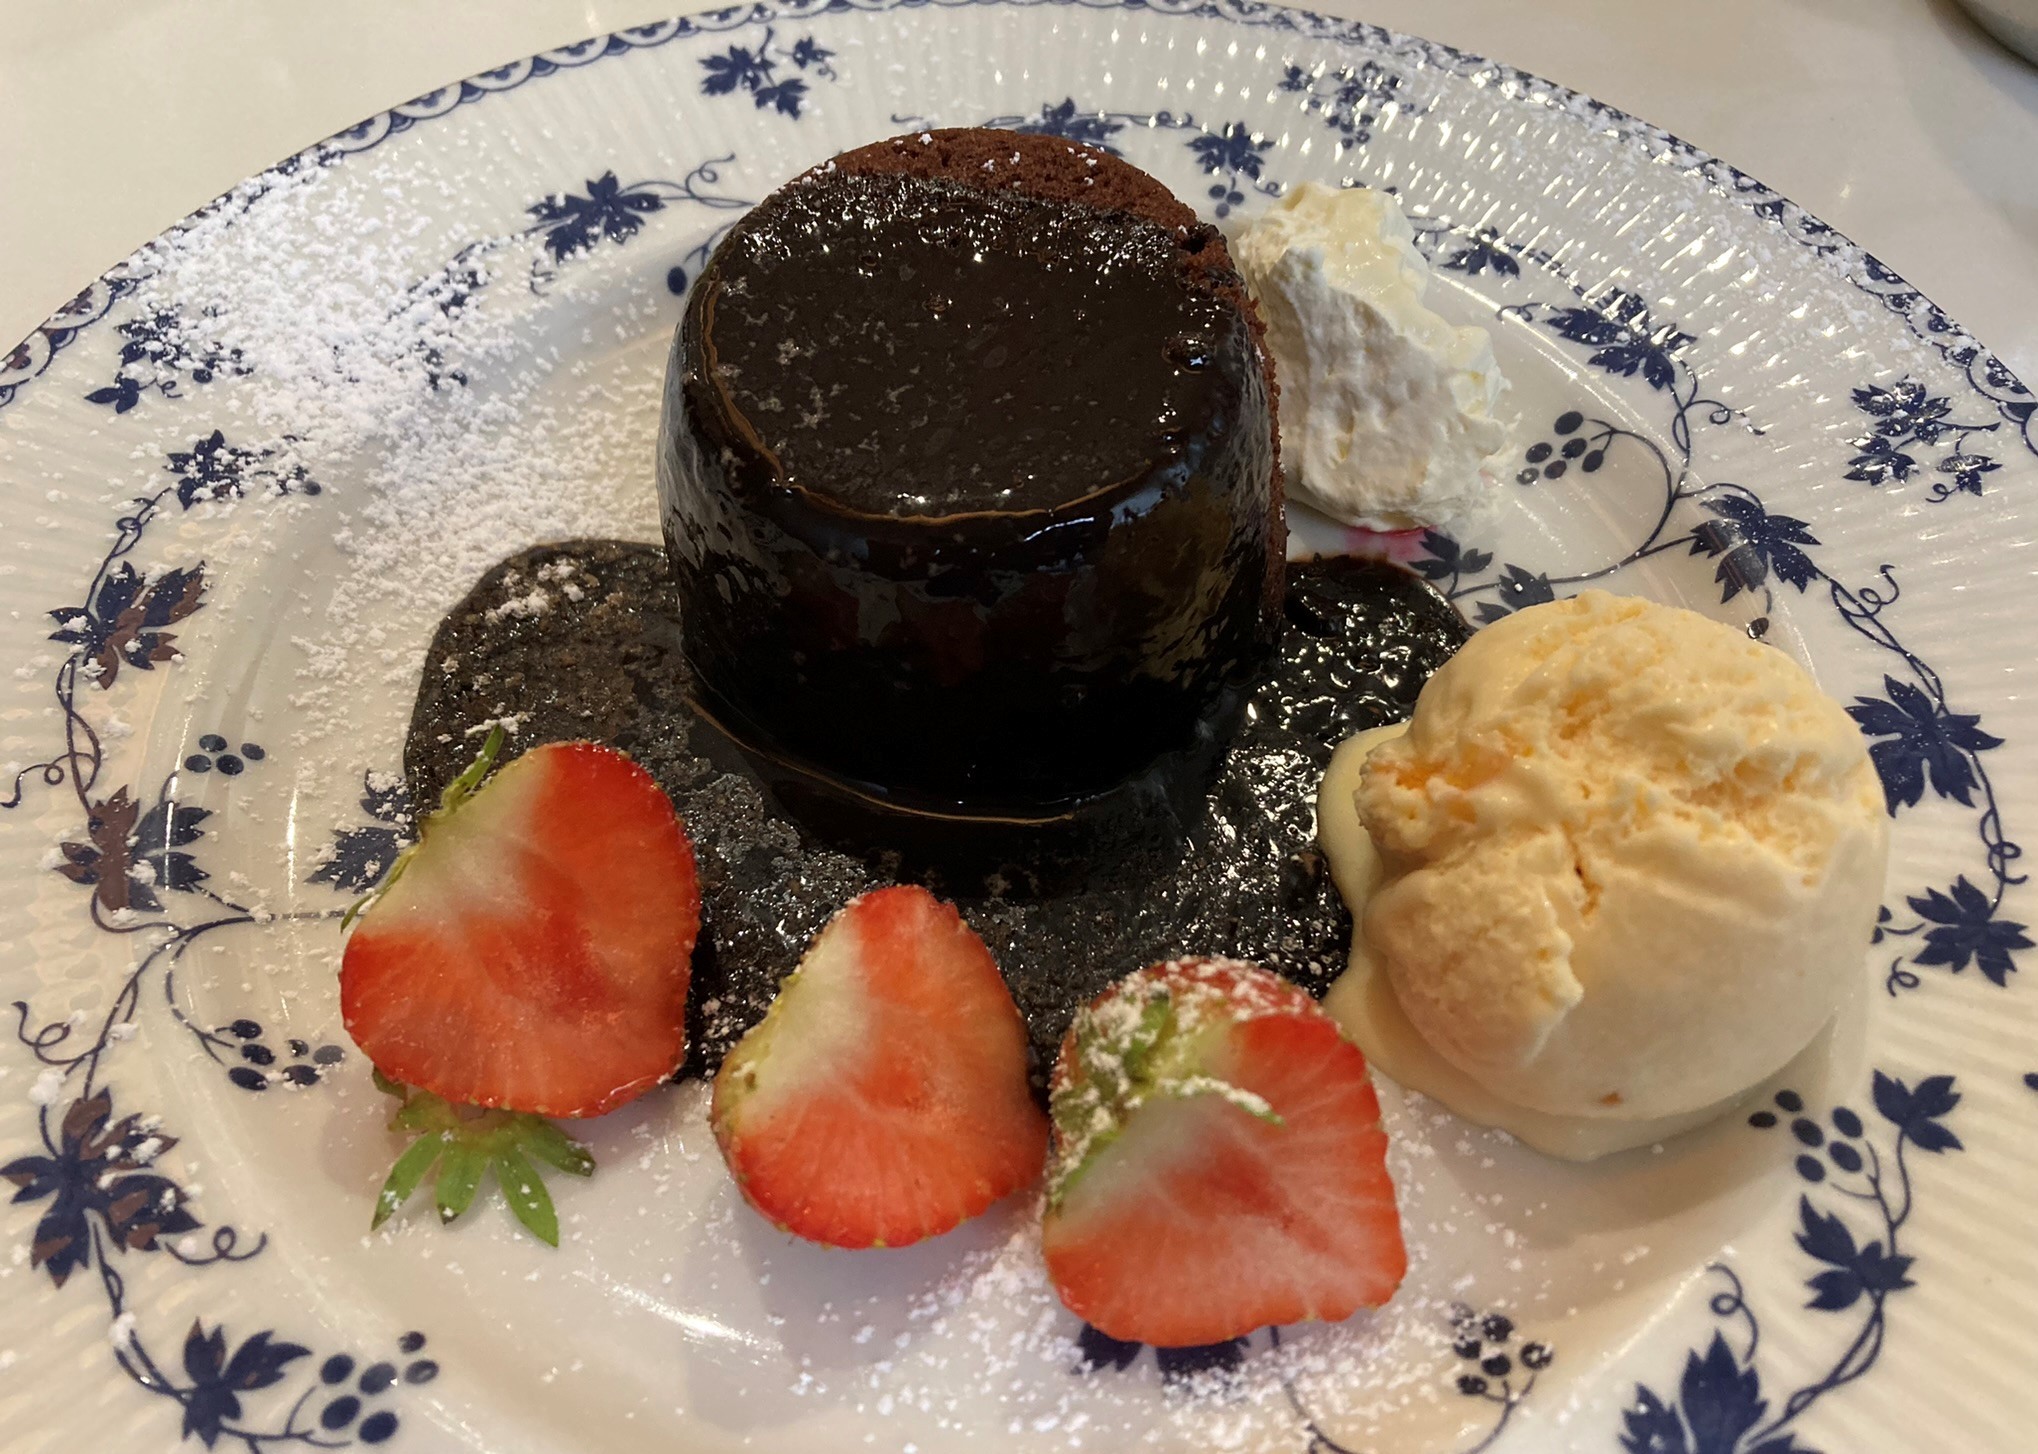 Chocolate pudding at Cafe Bowes